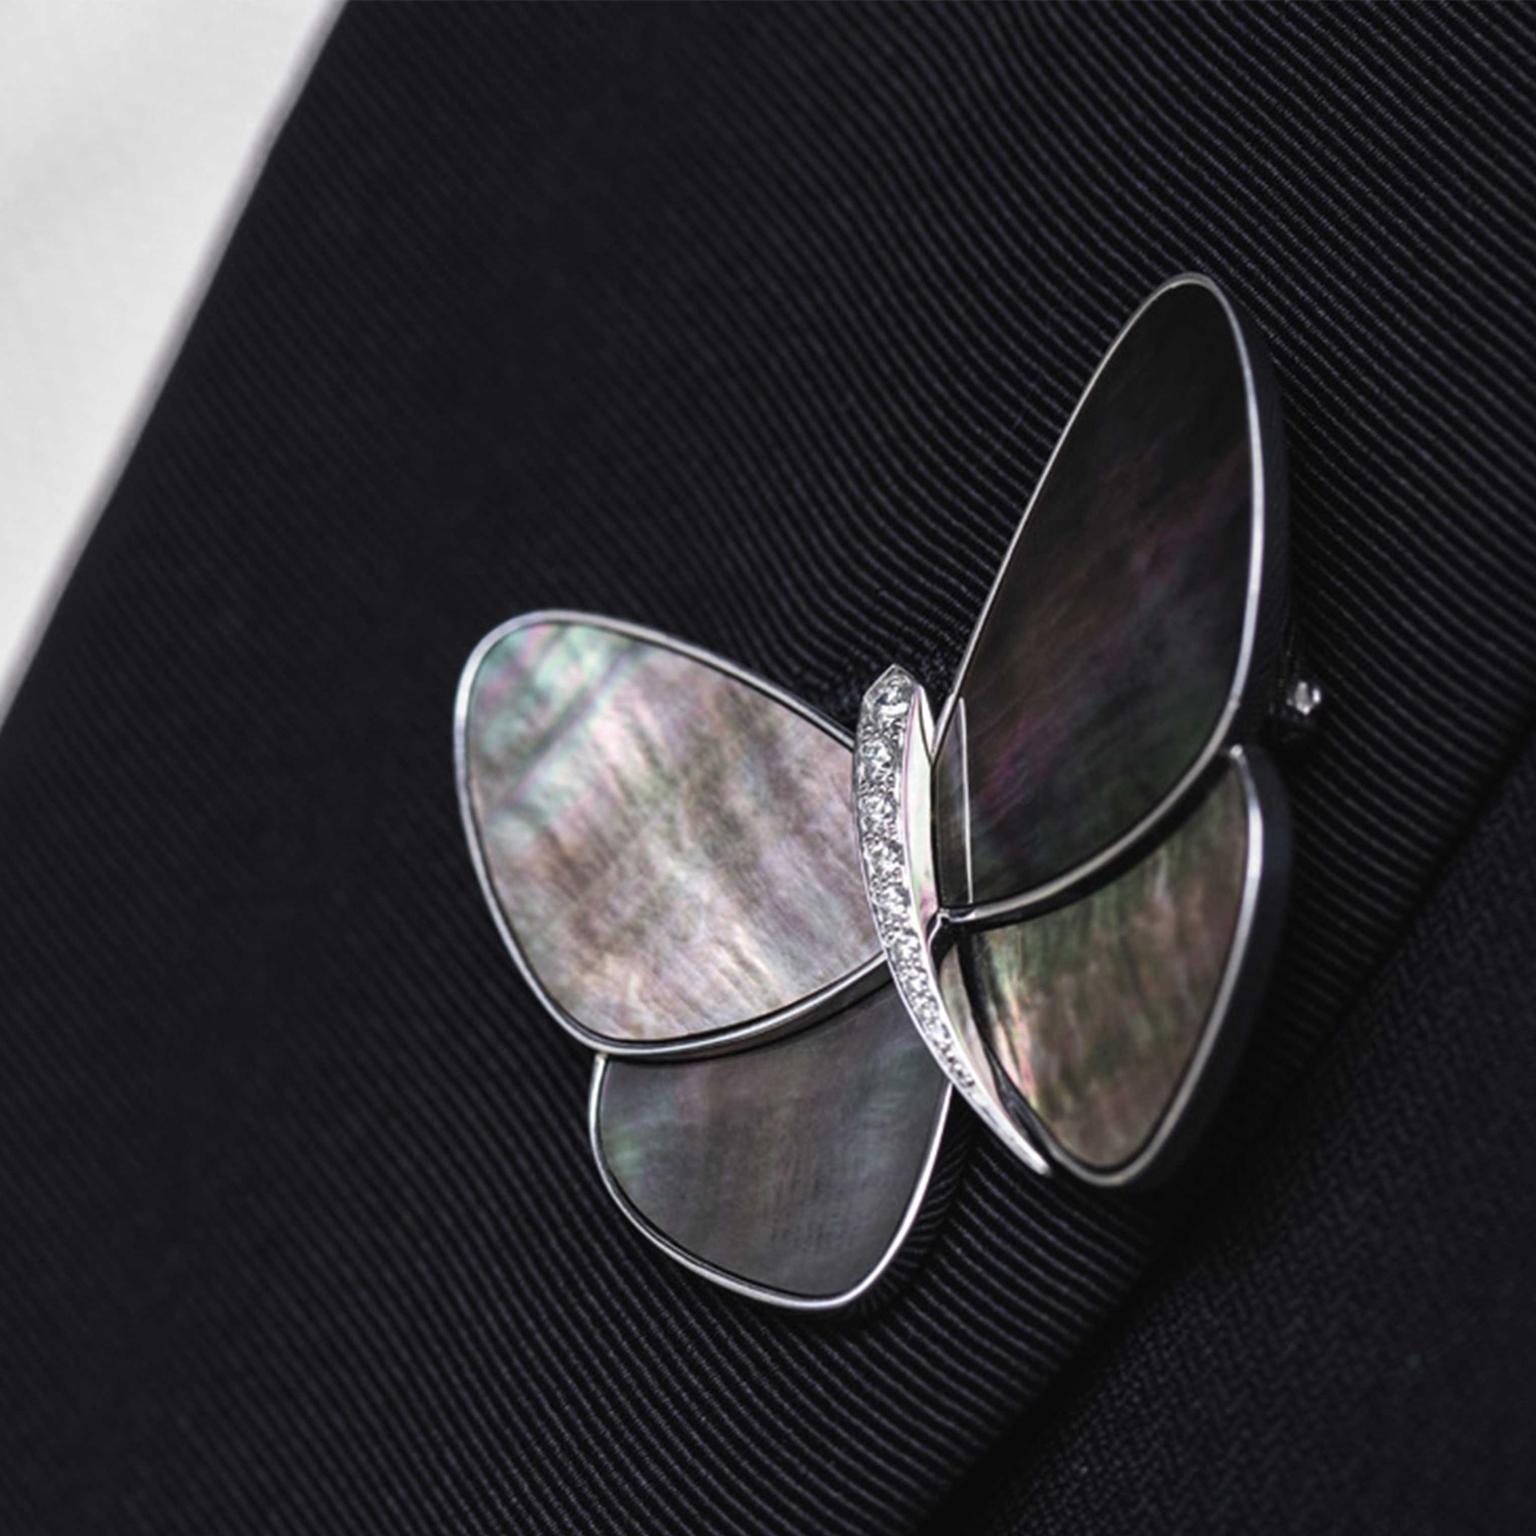 Fashion High-end Butterfly White Mother-of-pearl Brooch Women